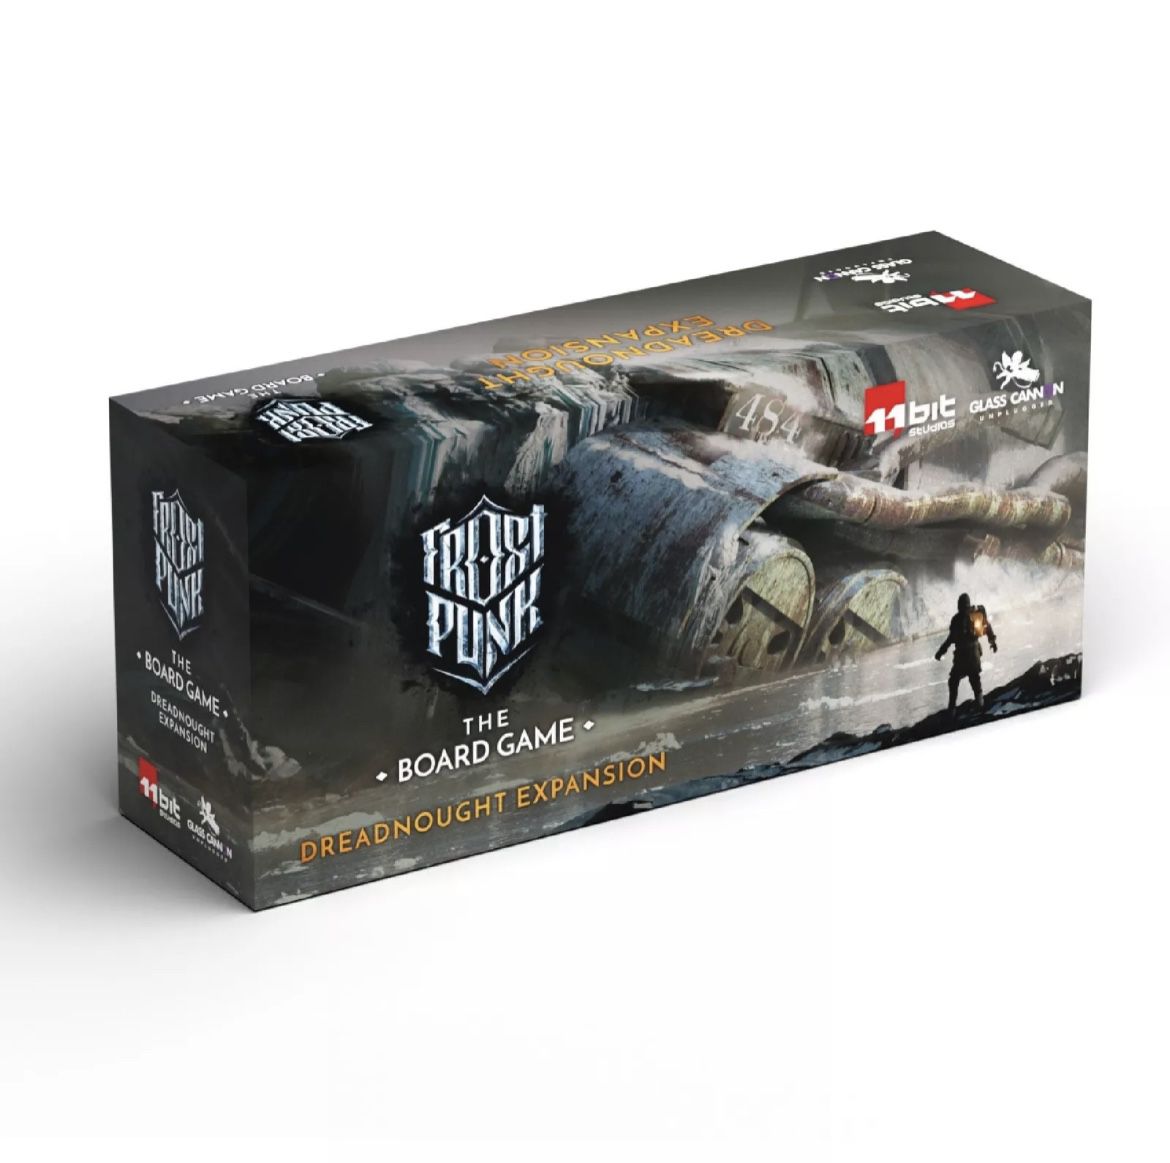 Frostpunk: The Board Game - Dreadnaught Expansion